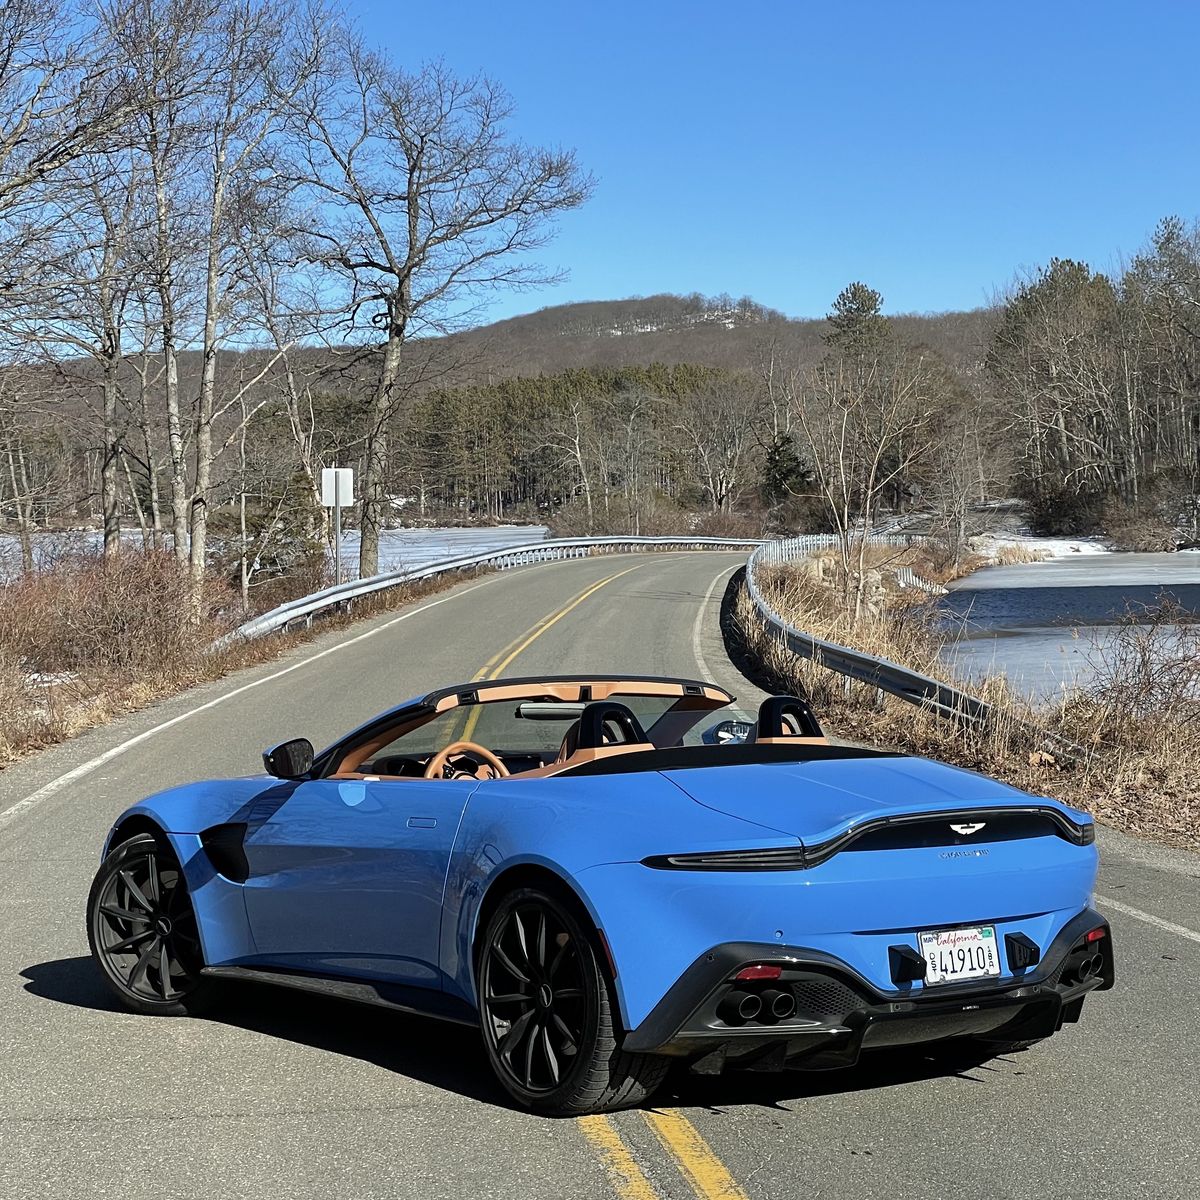 The 2021 Aston Martin Vantage Roadster Is a Topless Delight